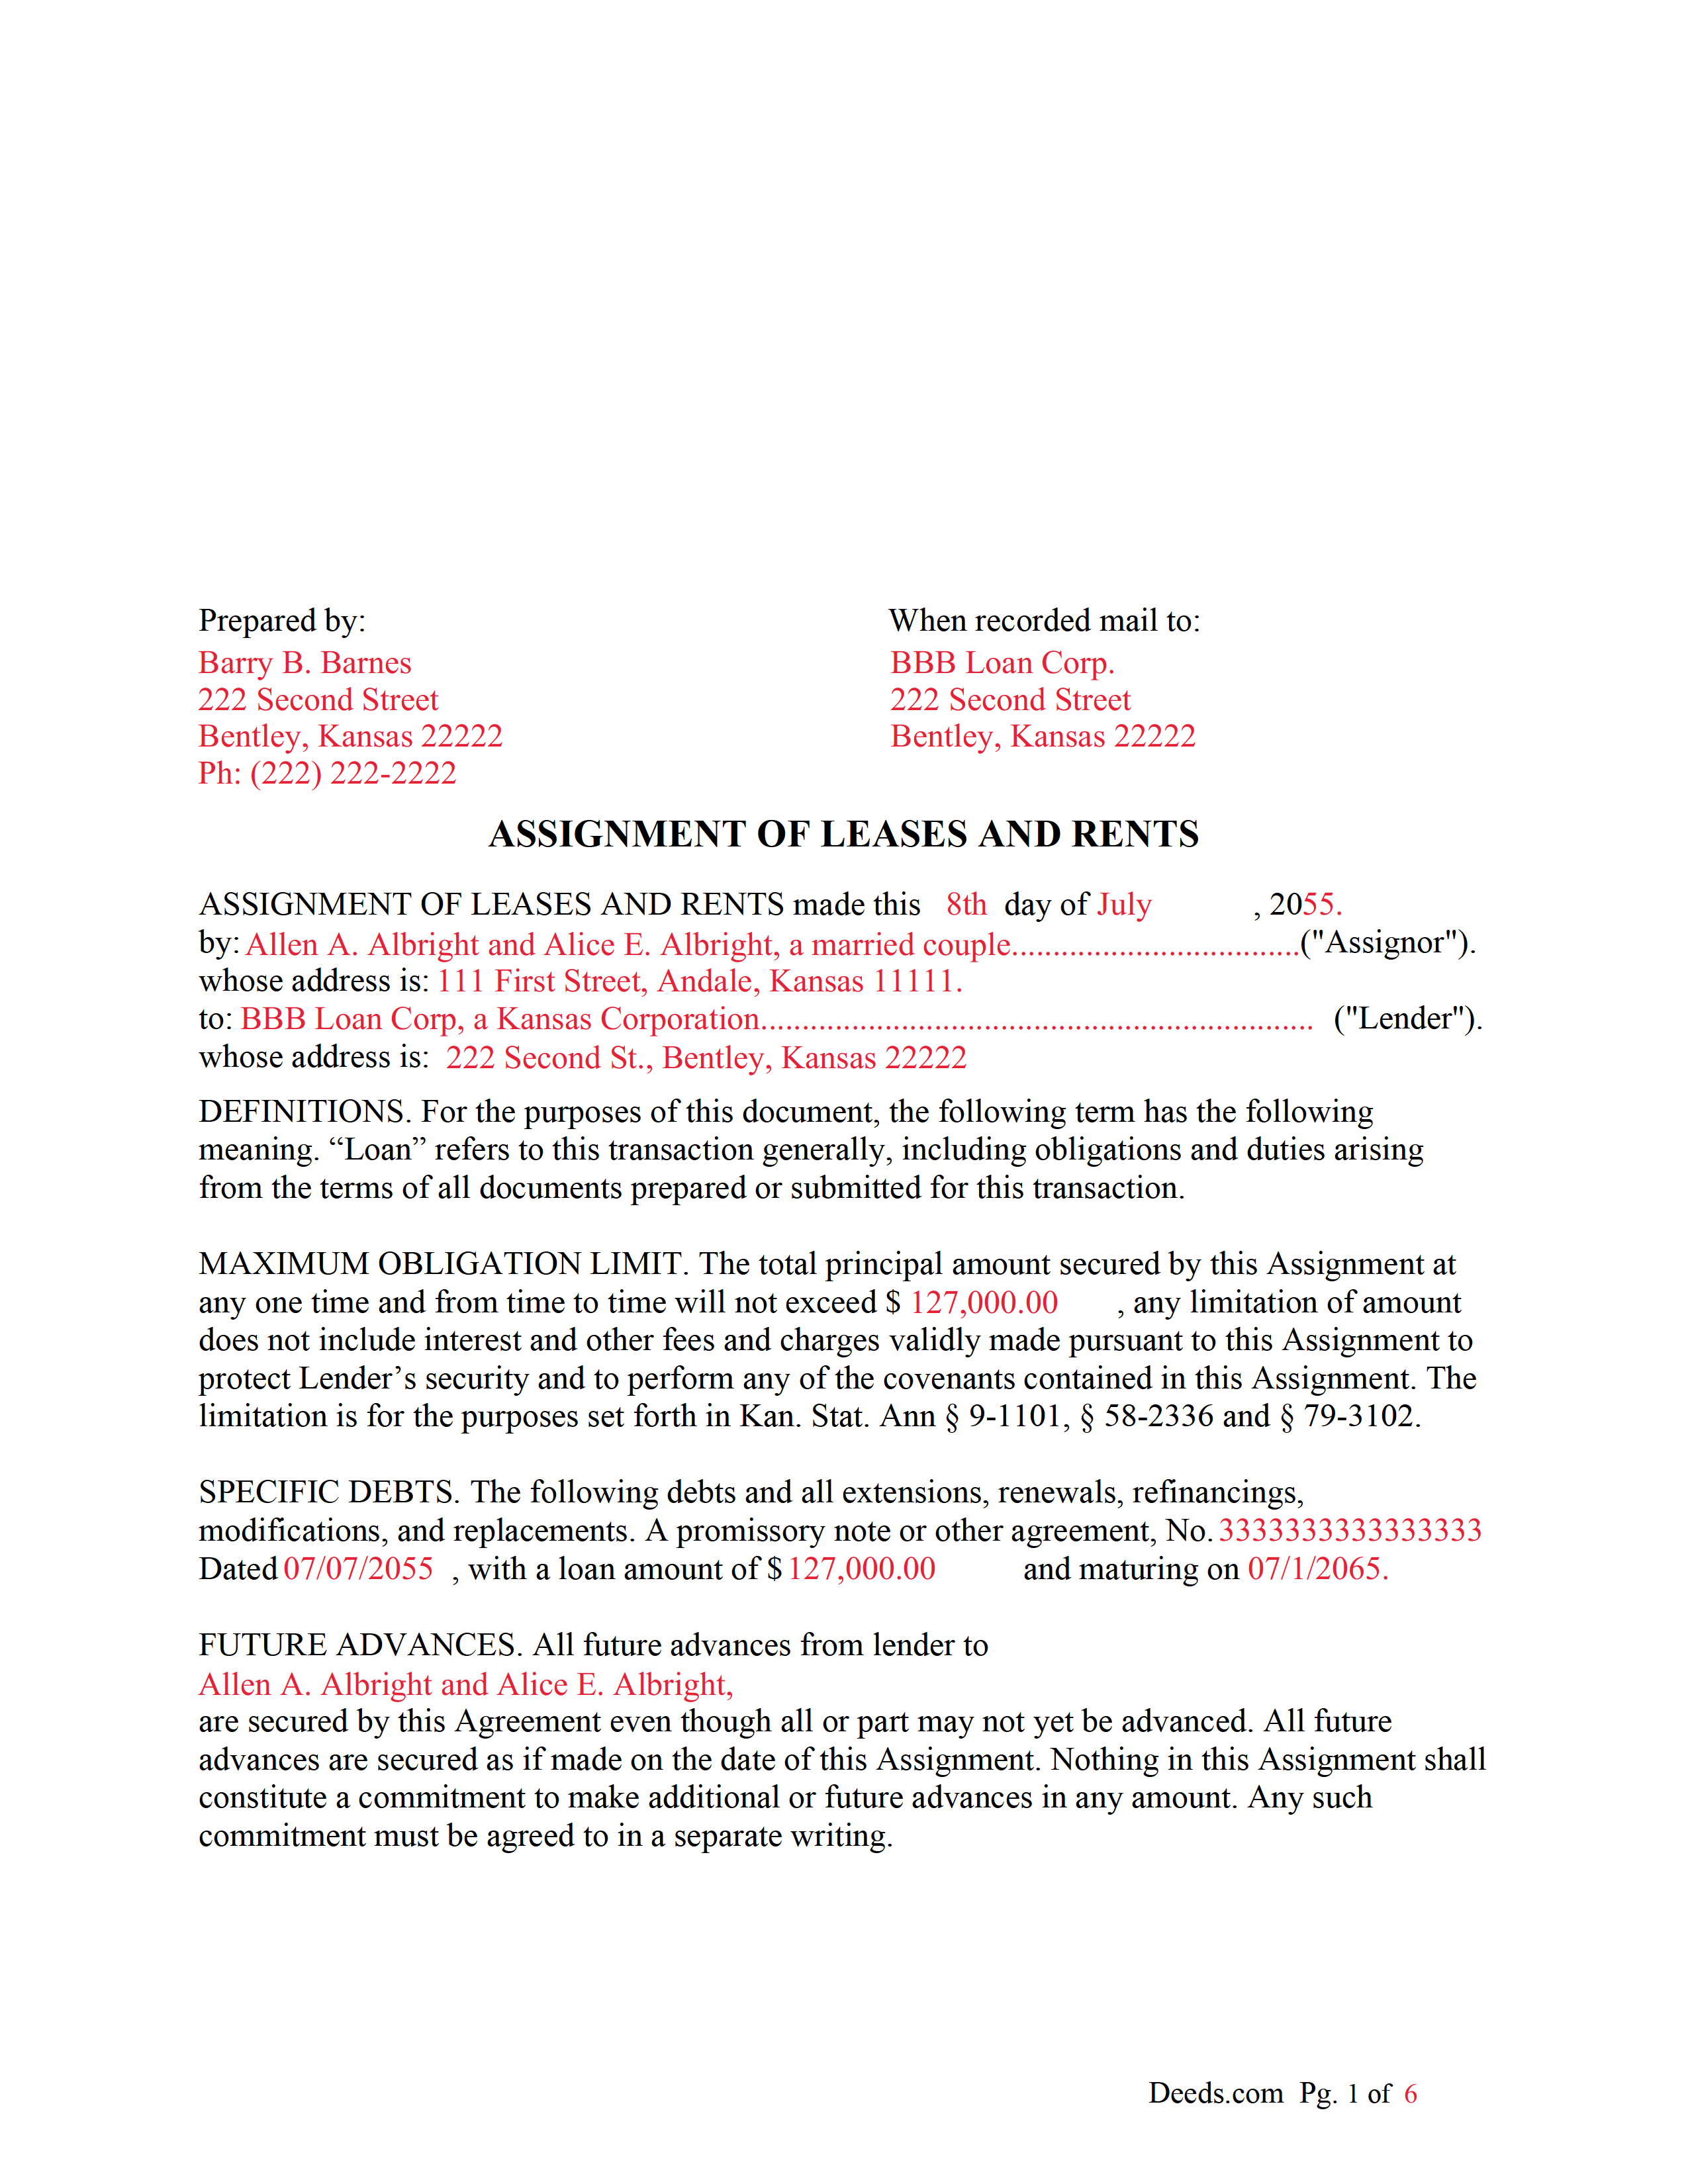 Woodson County Completed Example of the Assignment of Leases and Rents Document